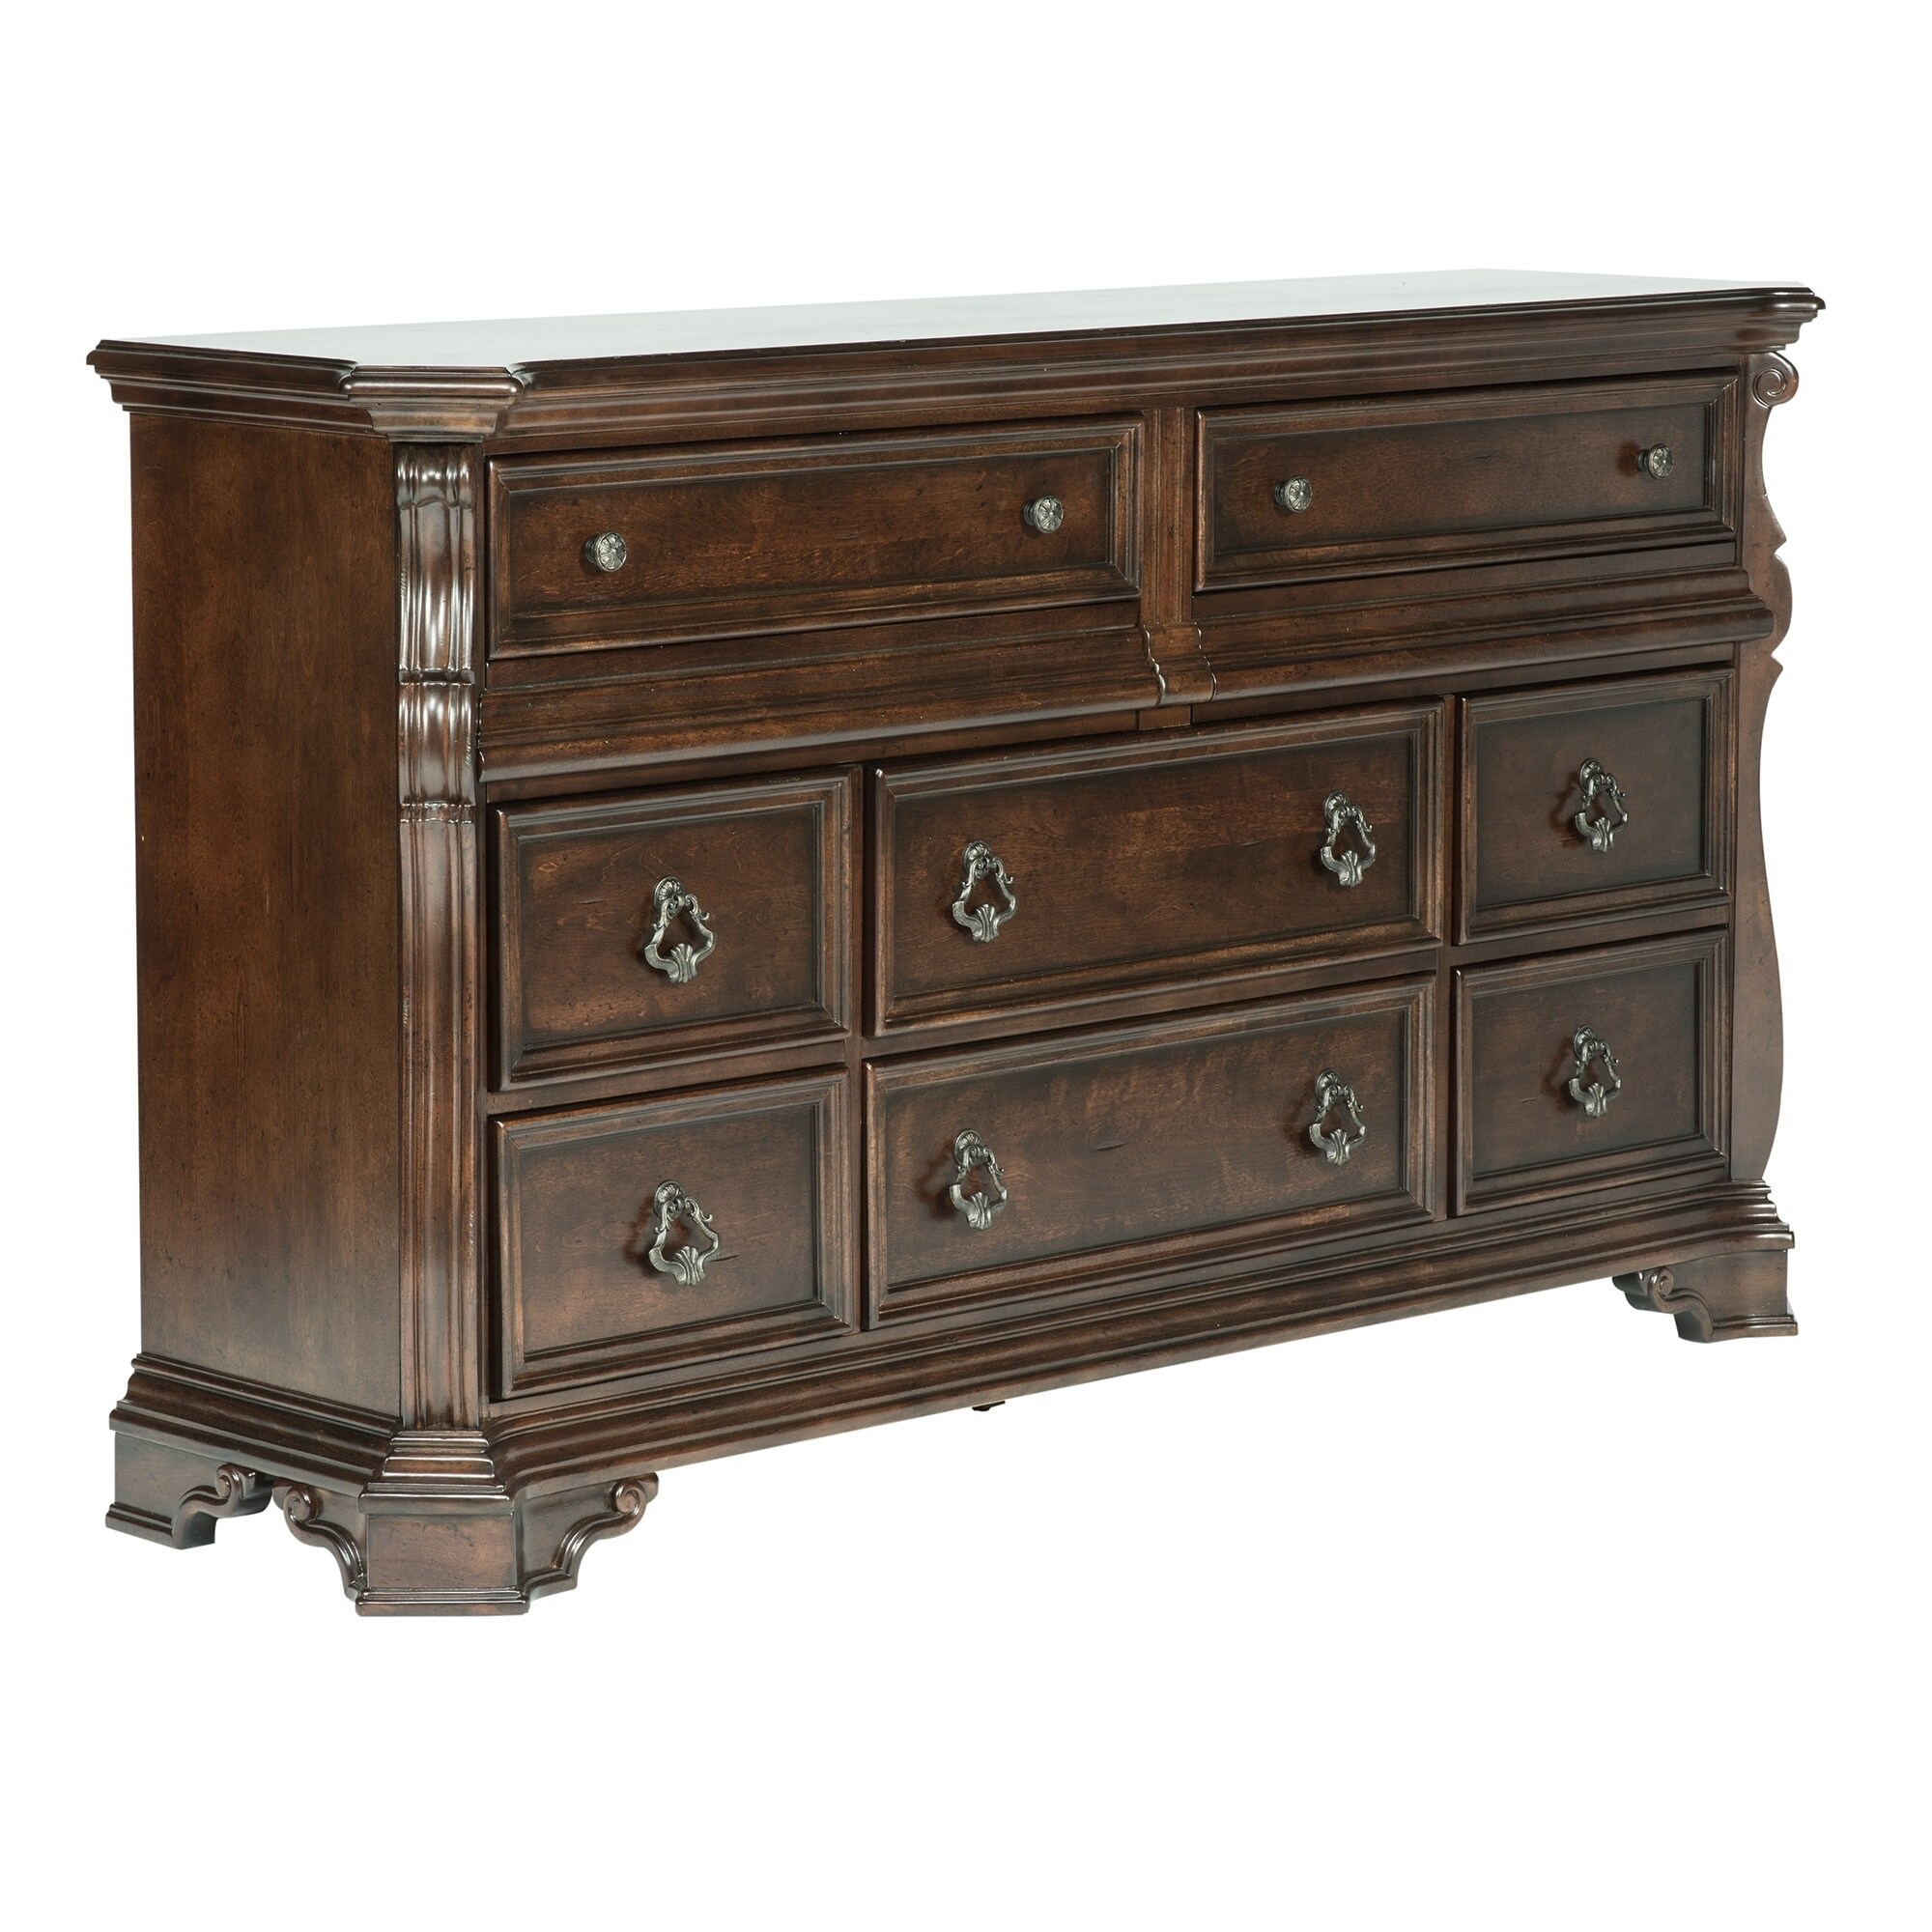 Liberty Furniture Industries Liberty Brownstone Traditional 8 drawer Dresser Brown Size 8 drawer